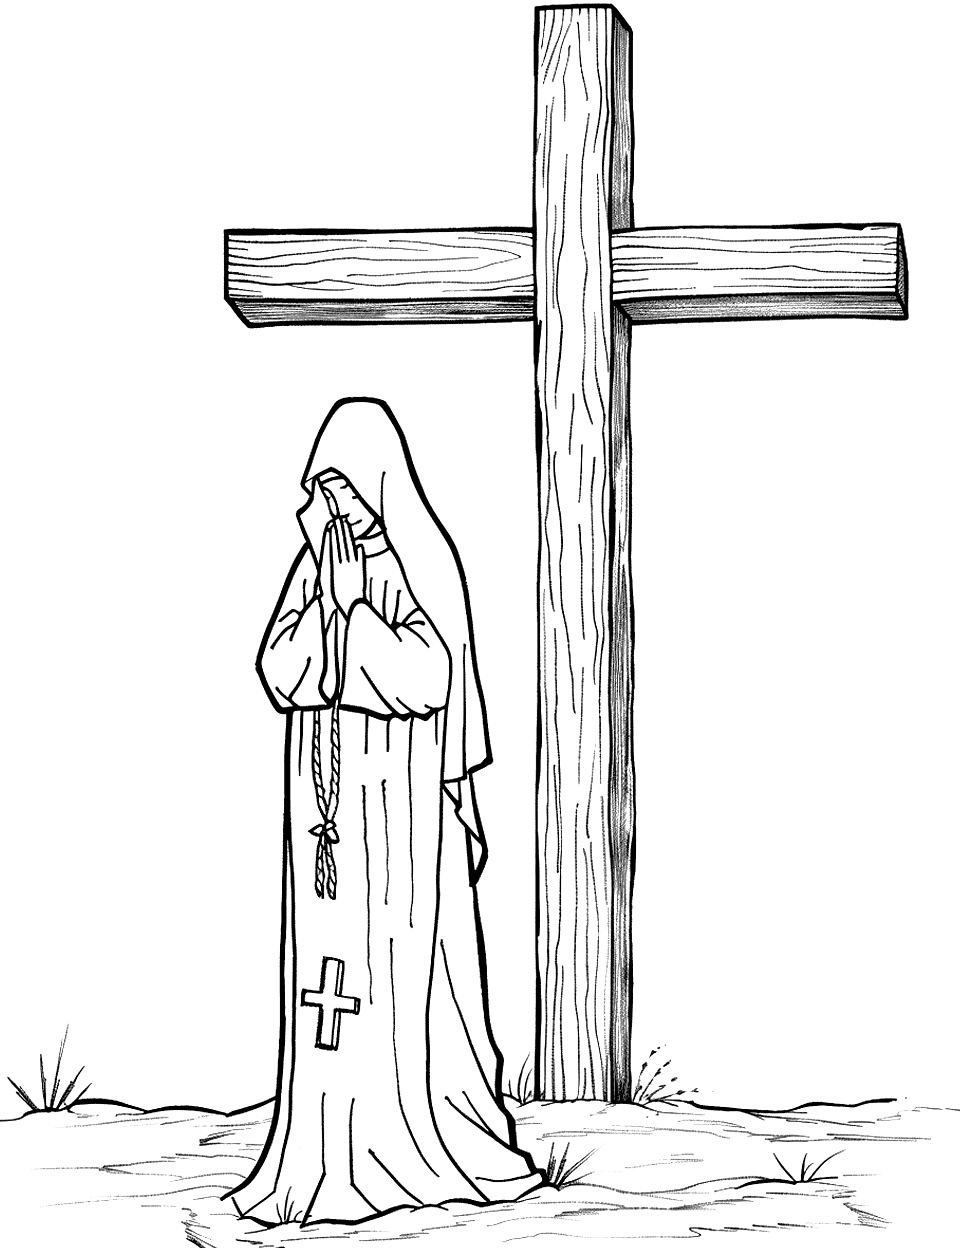 Nun Beside a Cross Coloring Page - A nun standing beside a tall cross, hands clasped in prayer.